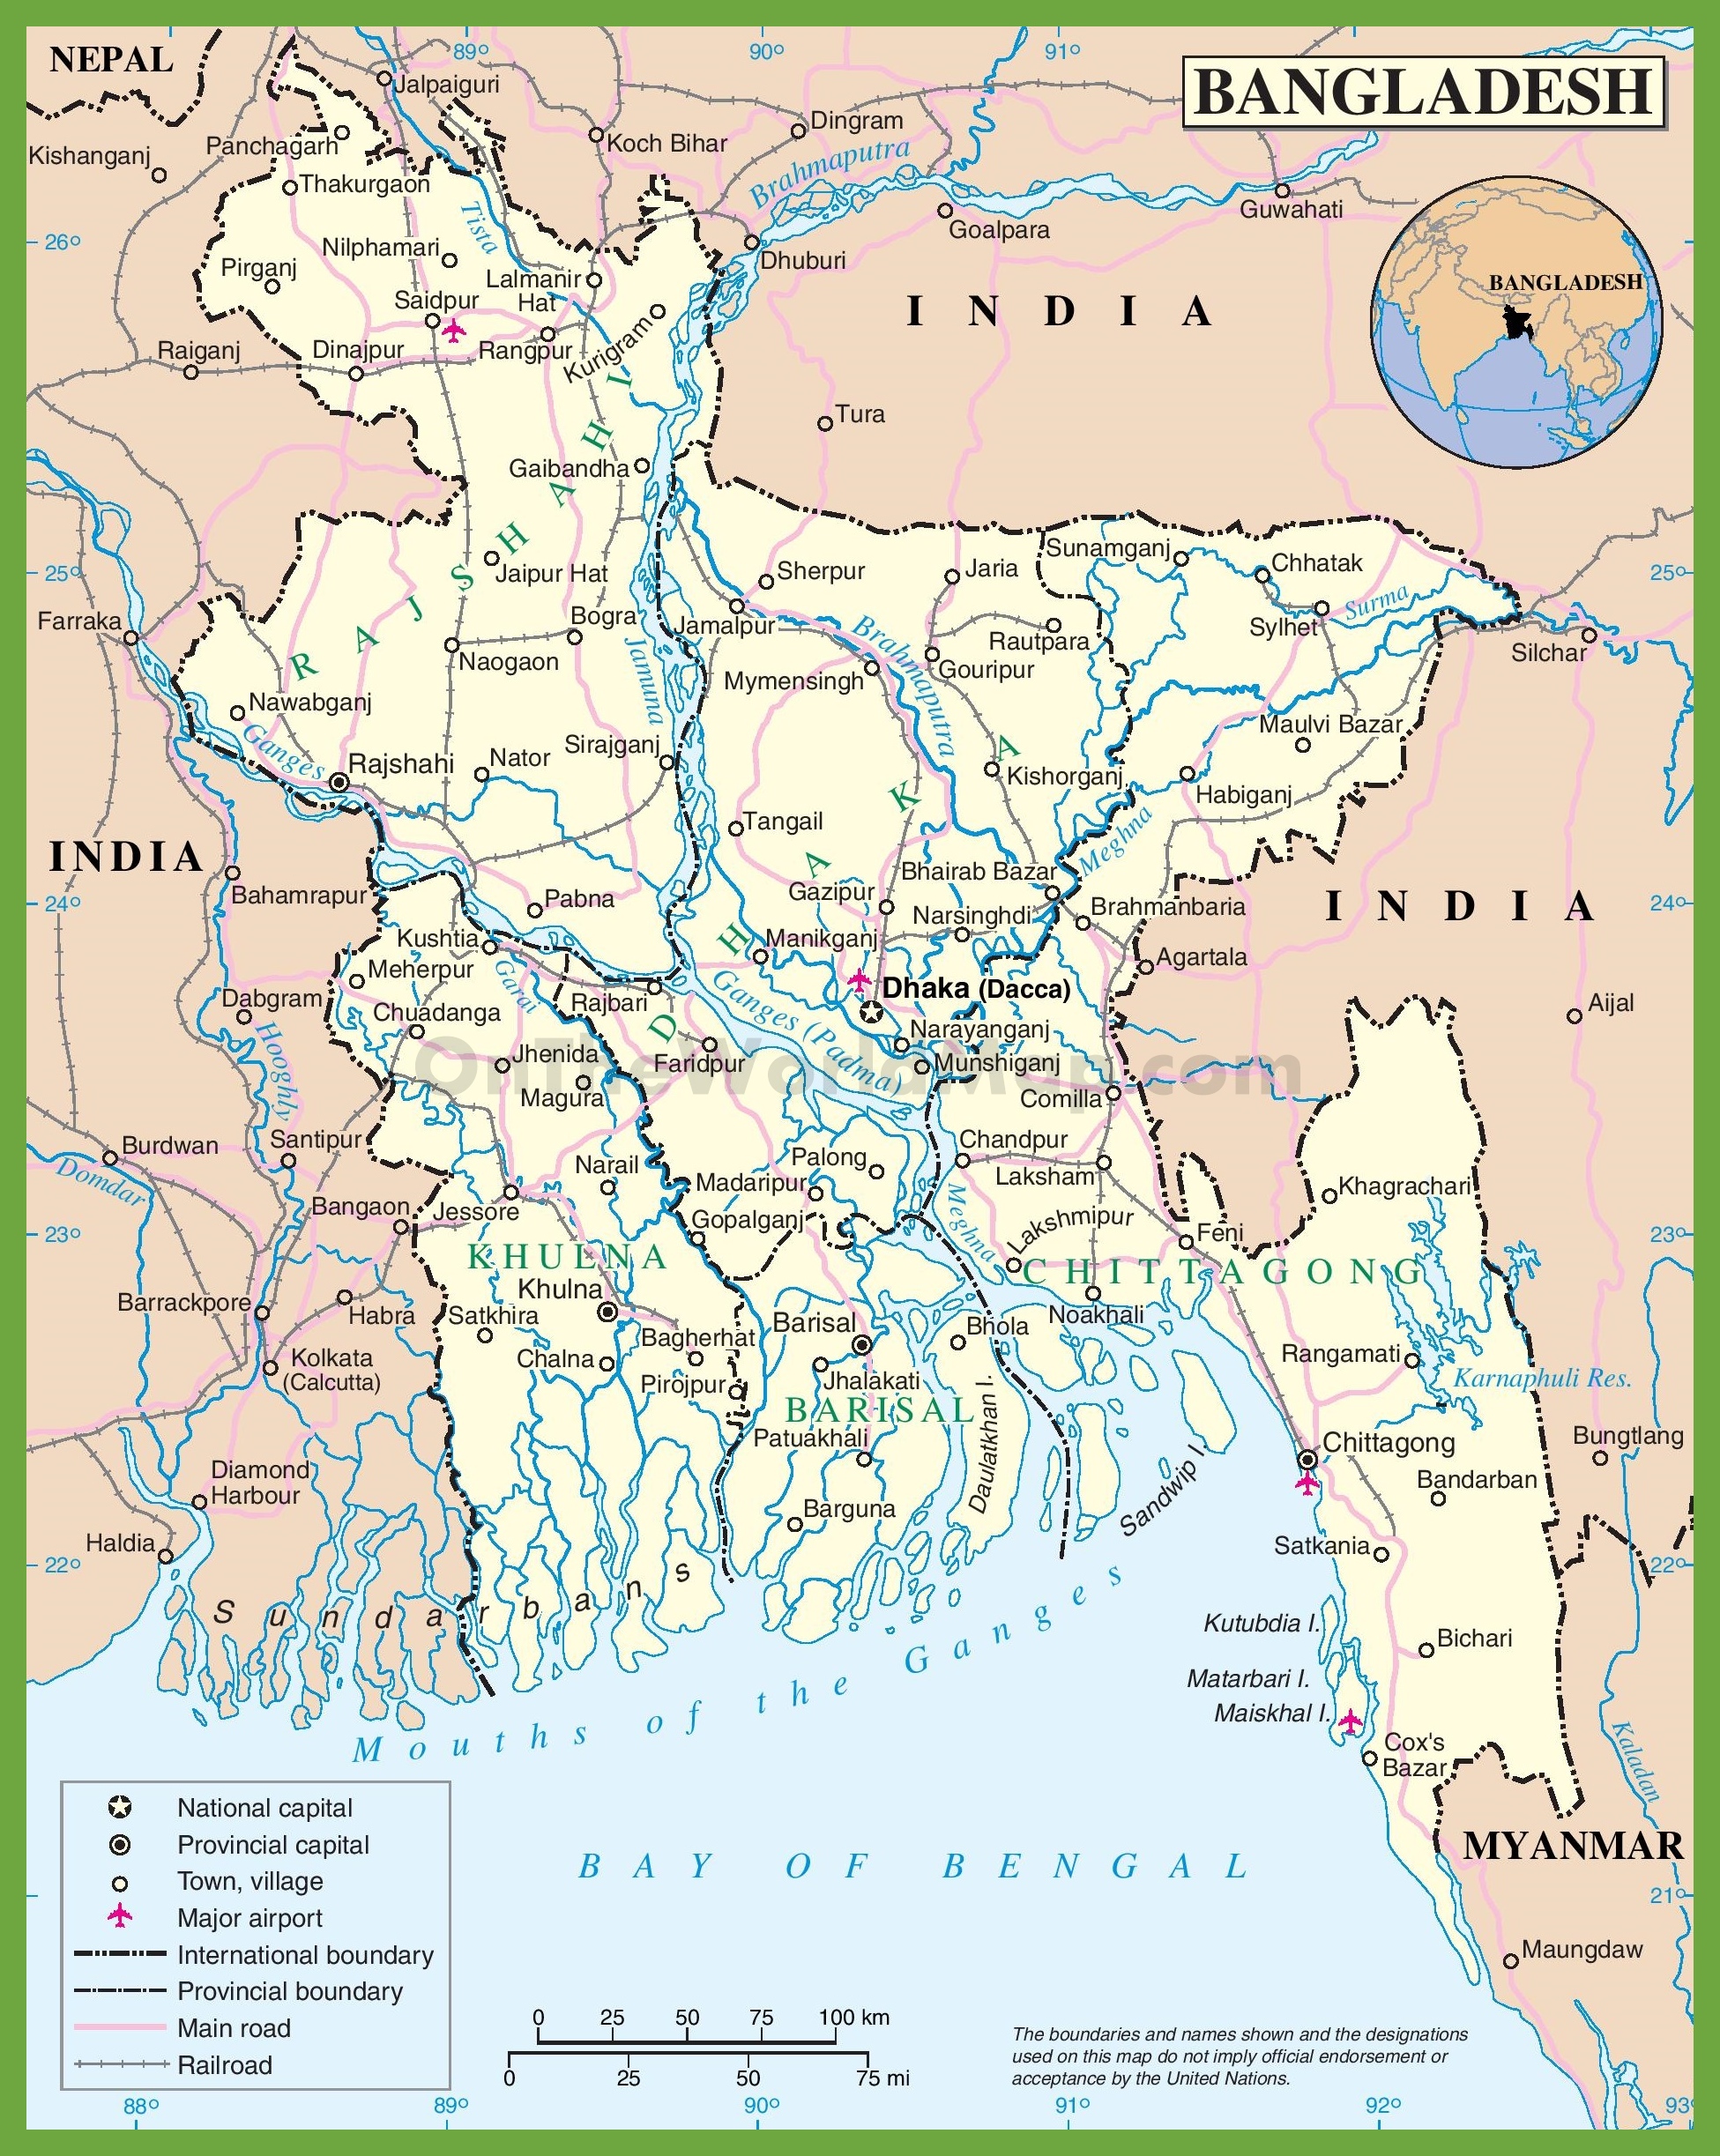 large-detailed-map-of-bangladesh-with-cities.jpg